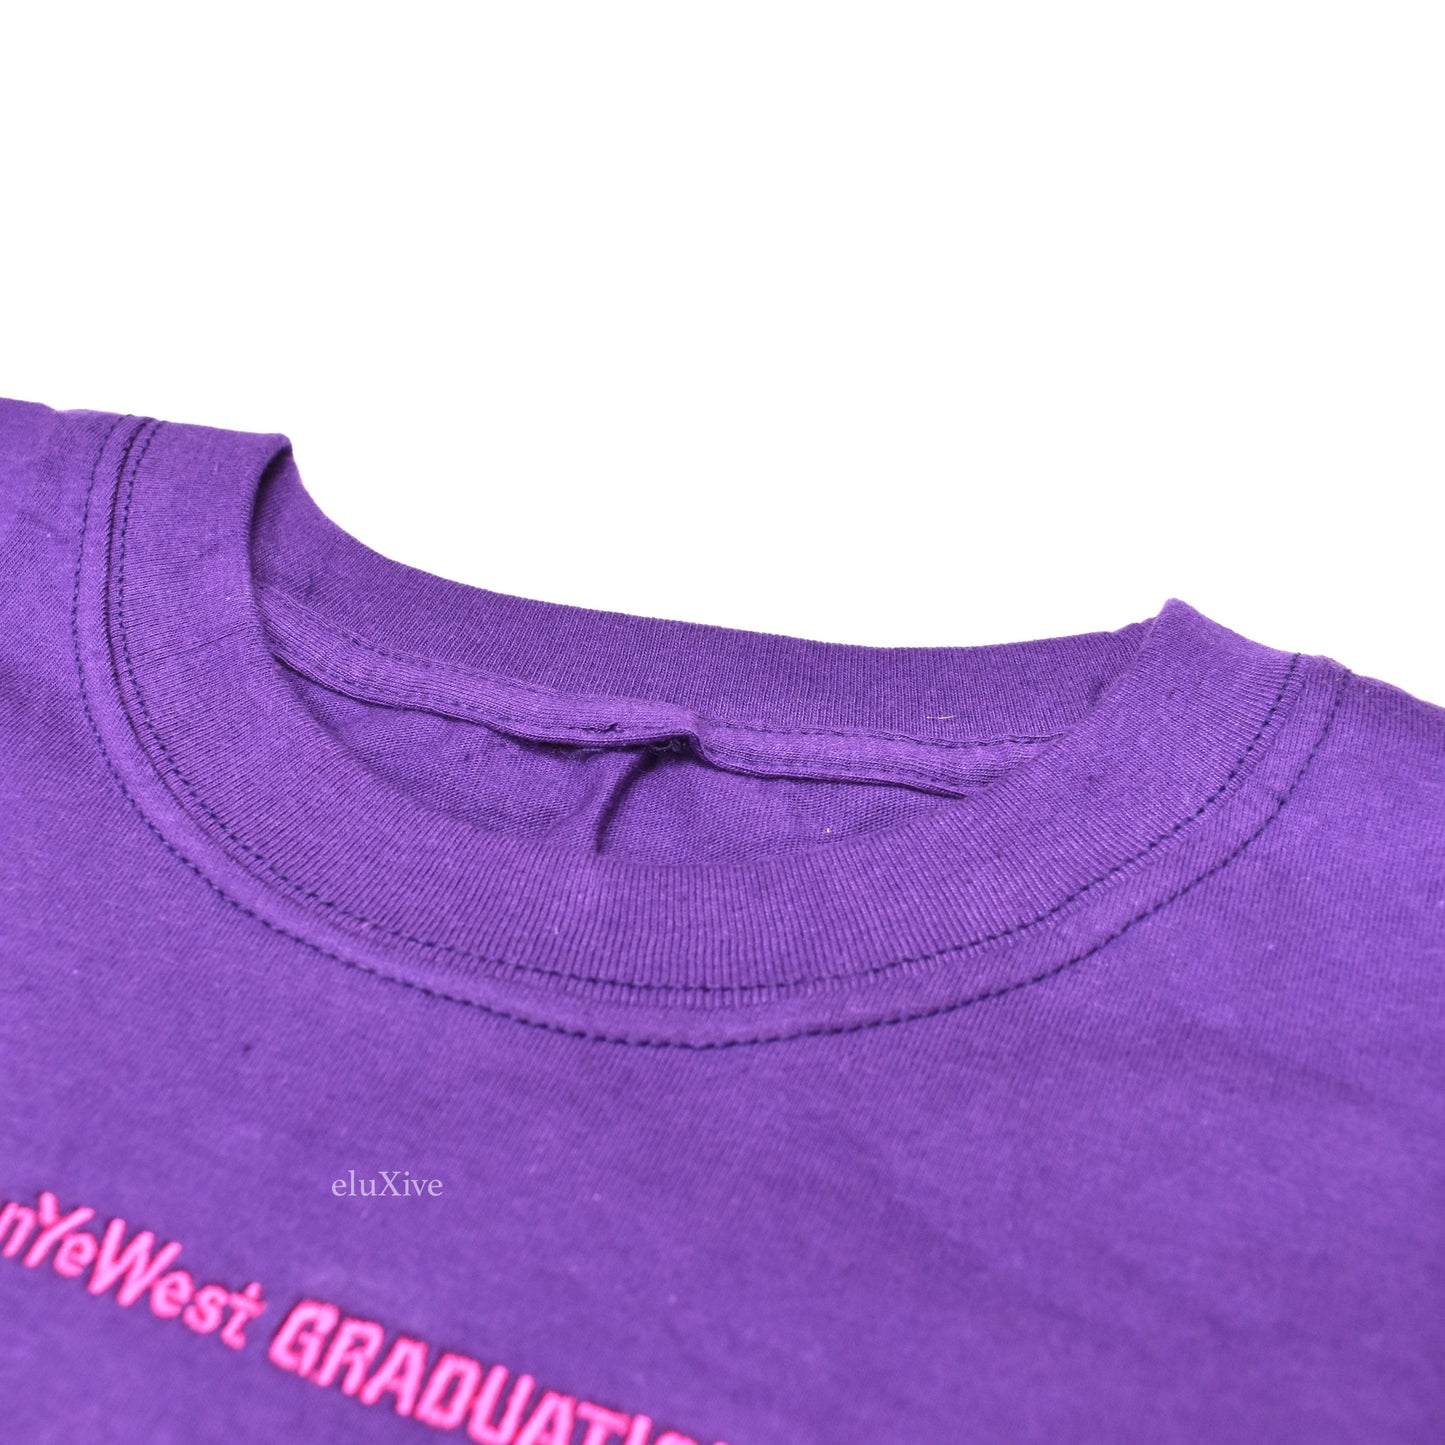 Collection 26 - Purple 'Graduation' Artwork Embroidered T-Shirt